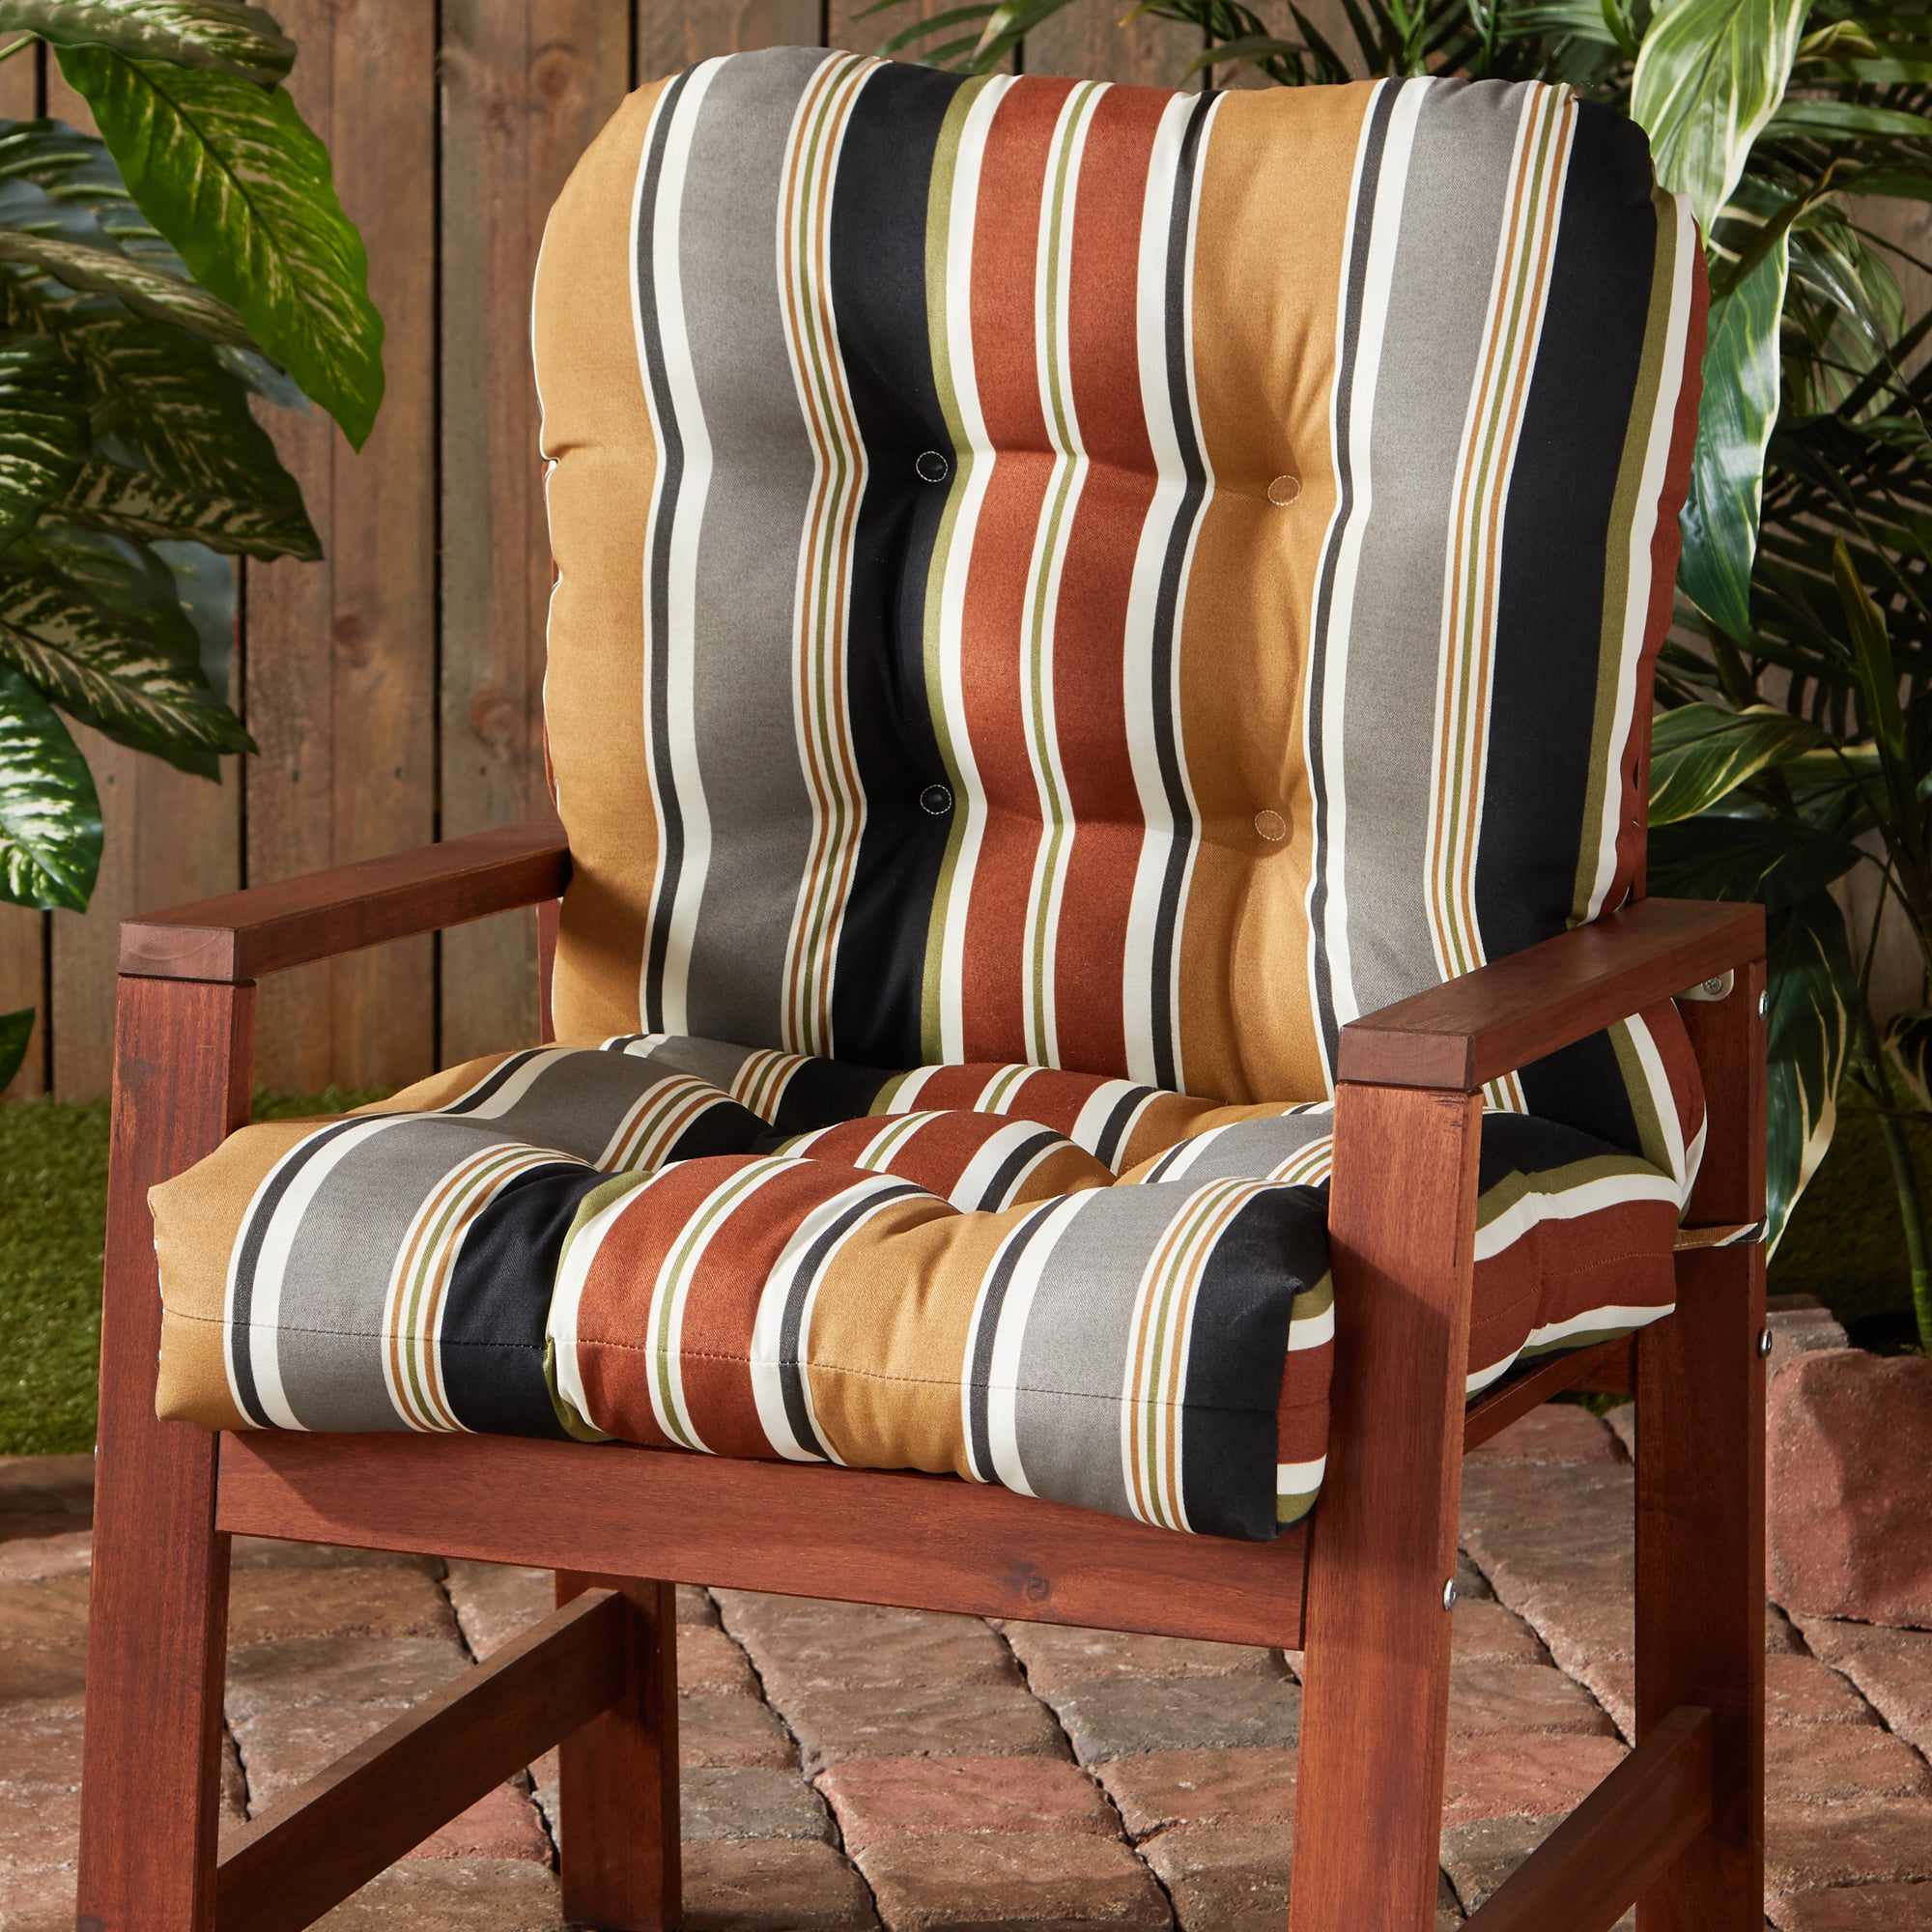 Outdoor Patio Seat Cushions ~ Chair Outdoor Cushion Seat Greendale ...